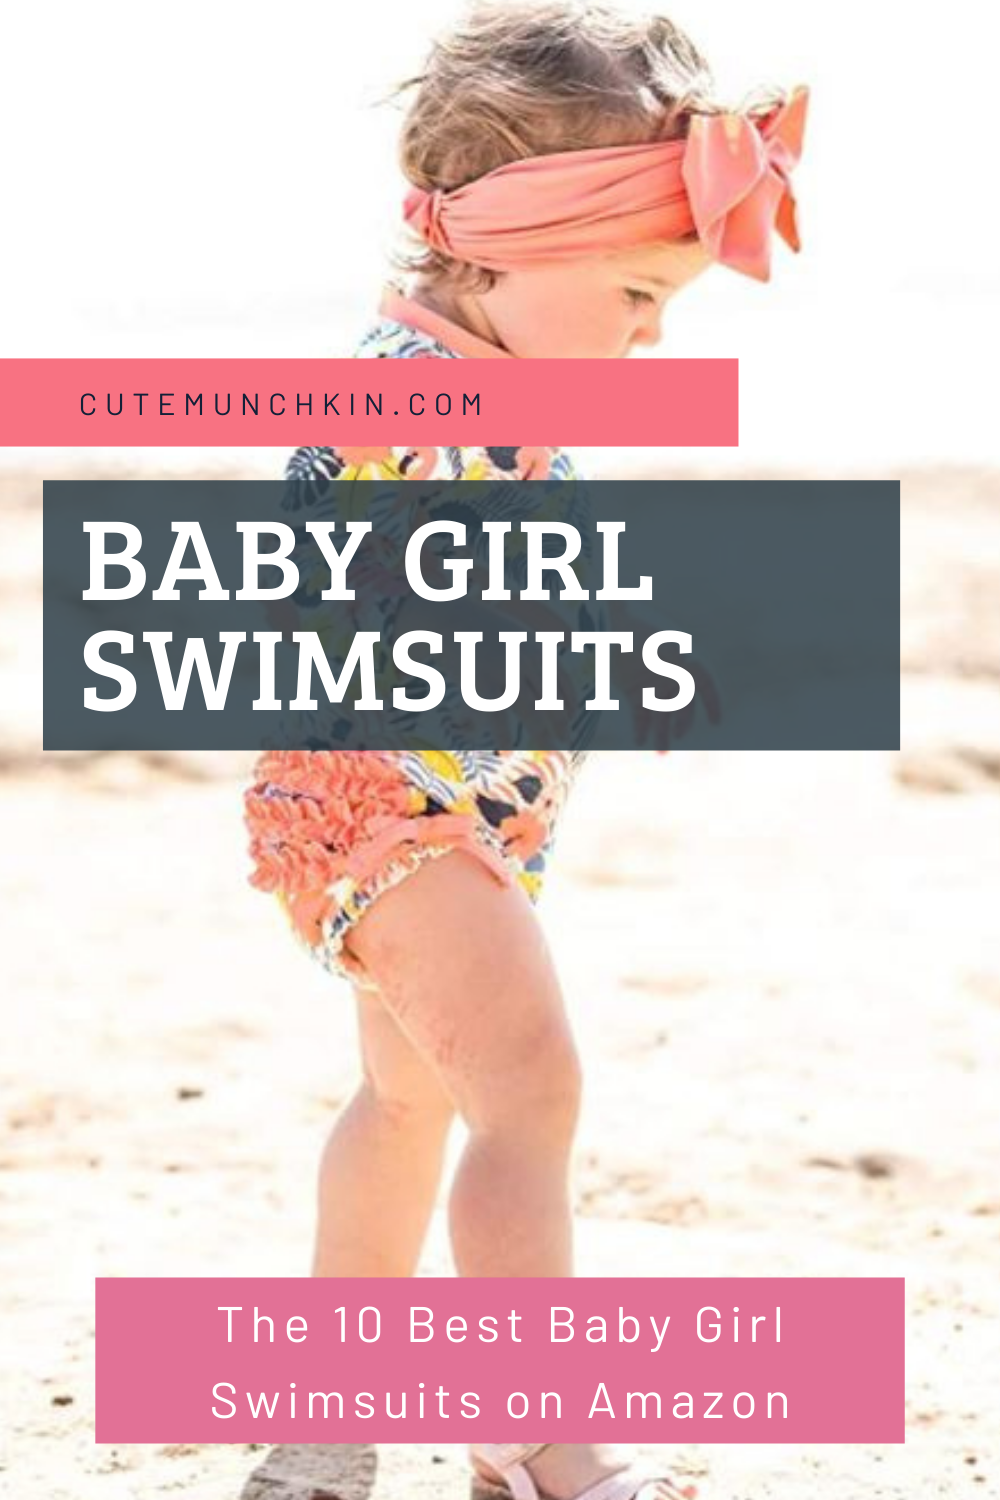 The 10 best Baby Girl Swimsuits by Cute Munchkin